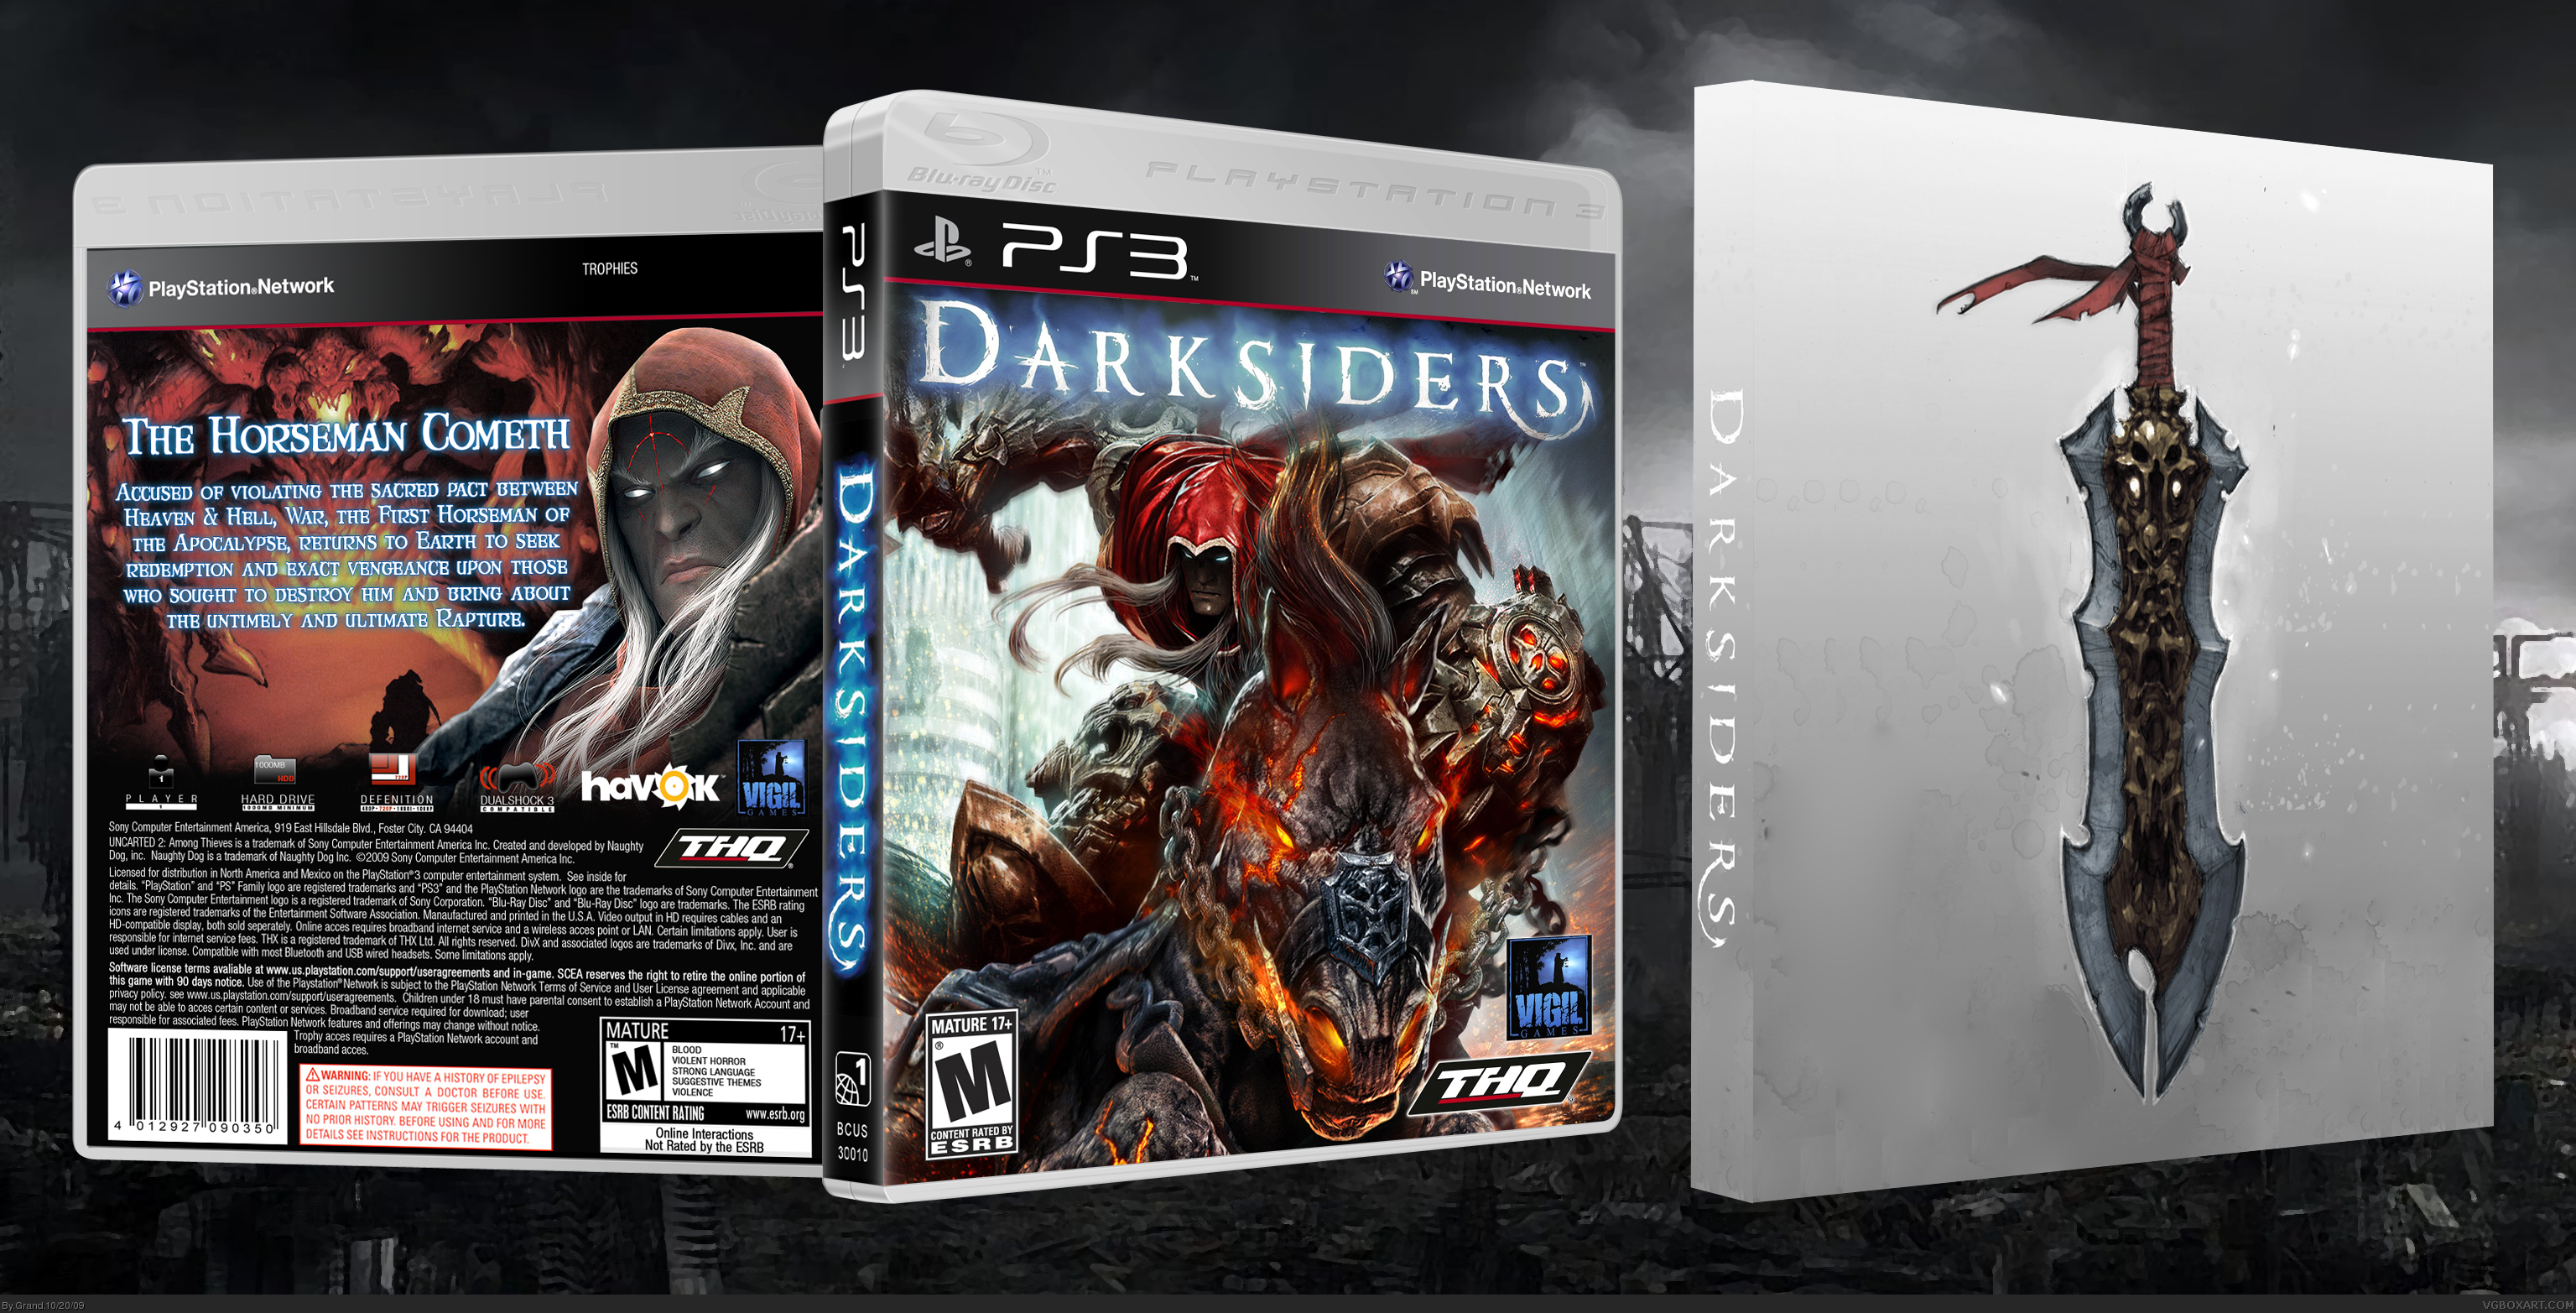 Darksiders: Wrath of War box cover